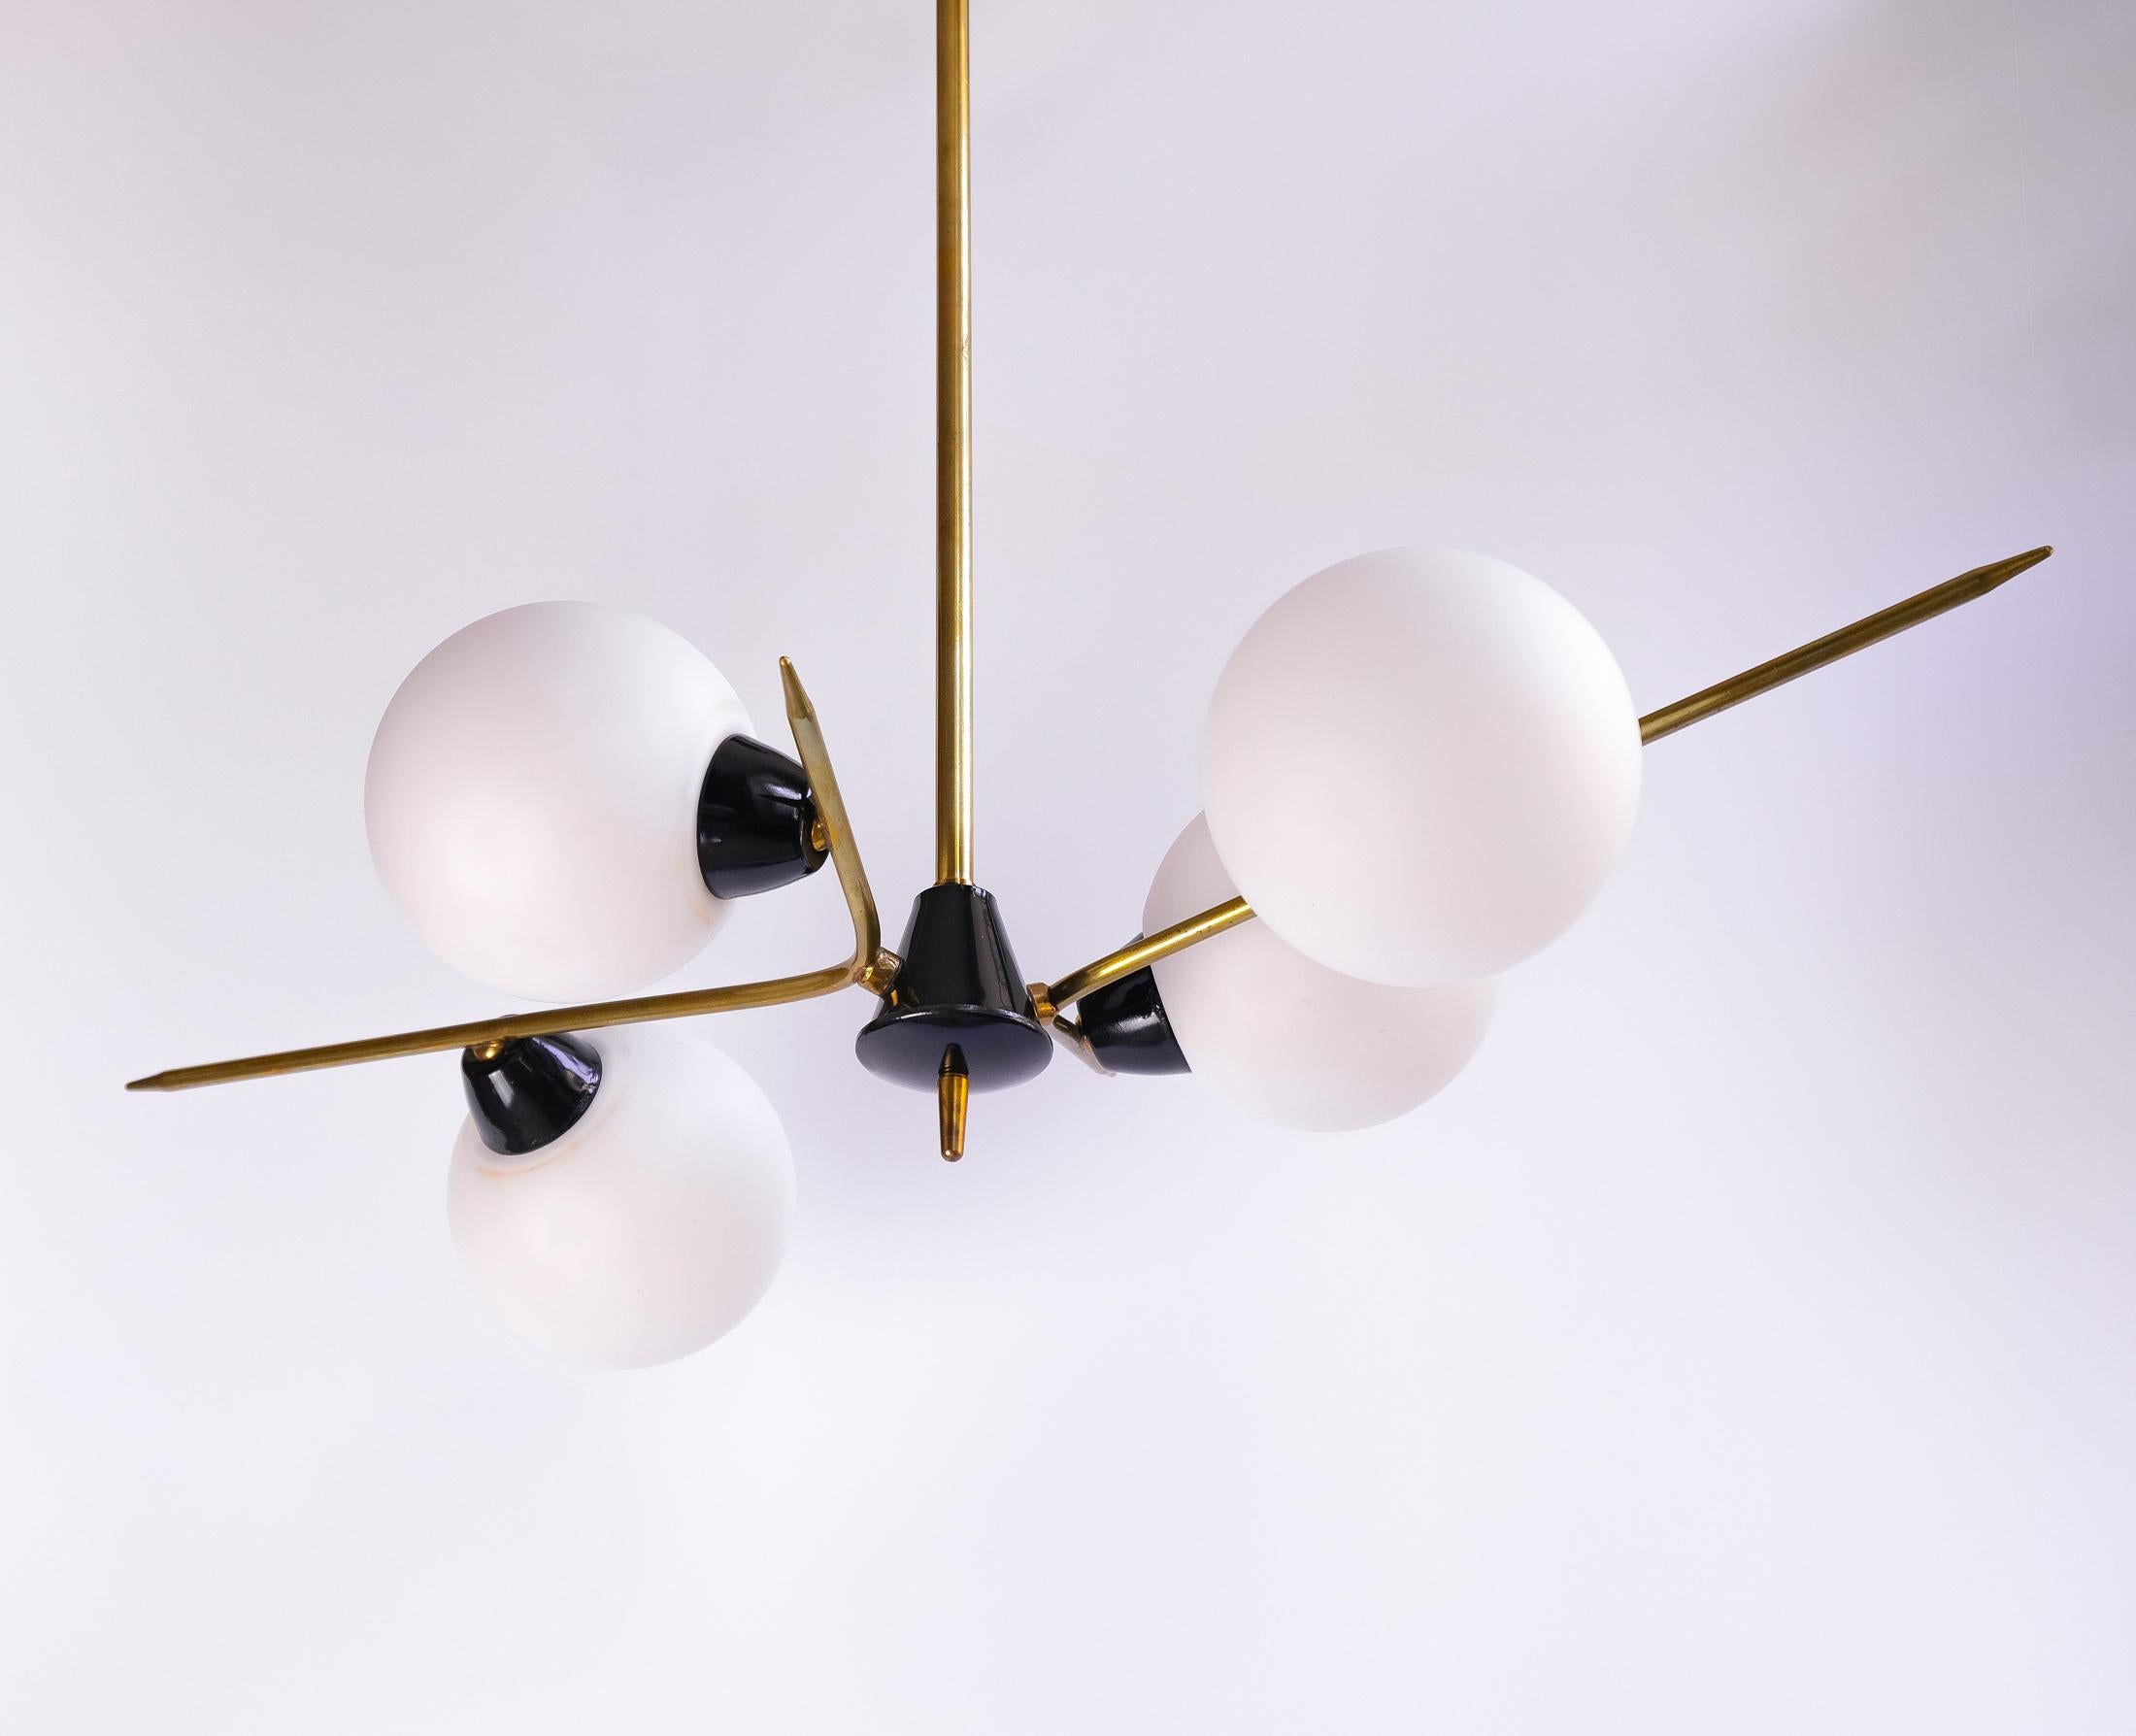 A wonderful Mid-Century Modernist French four-light chandelier, in-the-manner-of Maison Arlus and dating from circa 1950s. The lamp consists of brass and black lacquered metal and has 4 cased-glass opaline globes.

In working order, with its